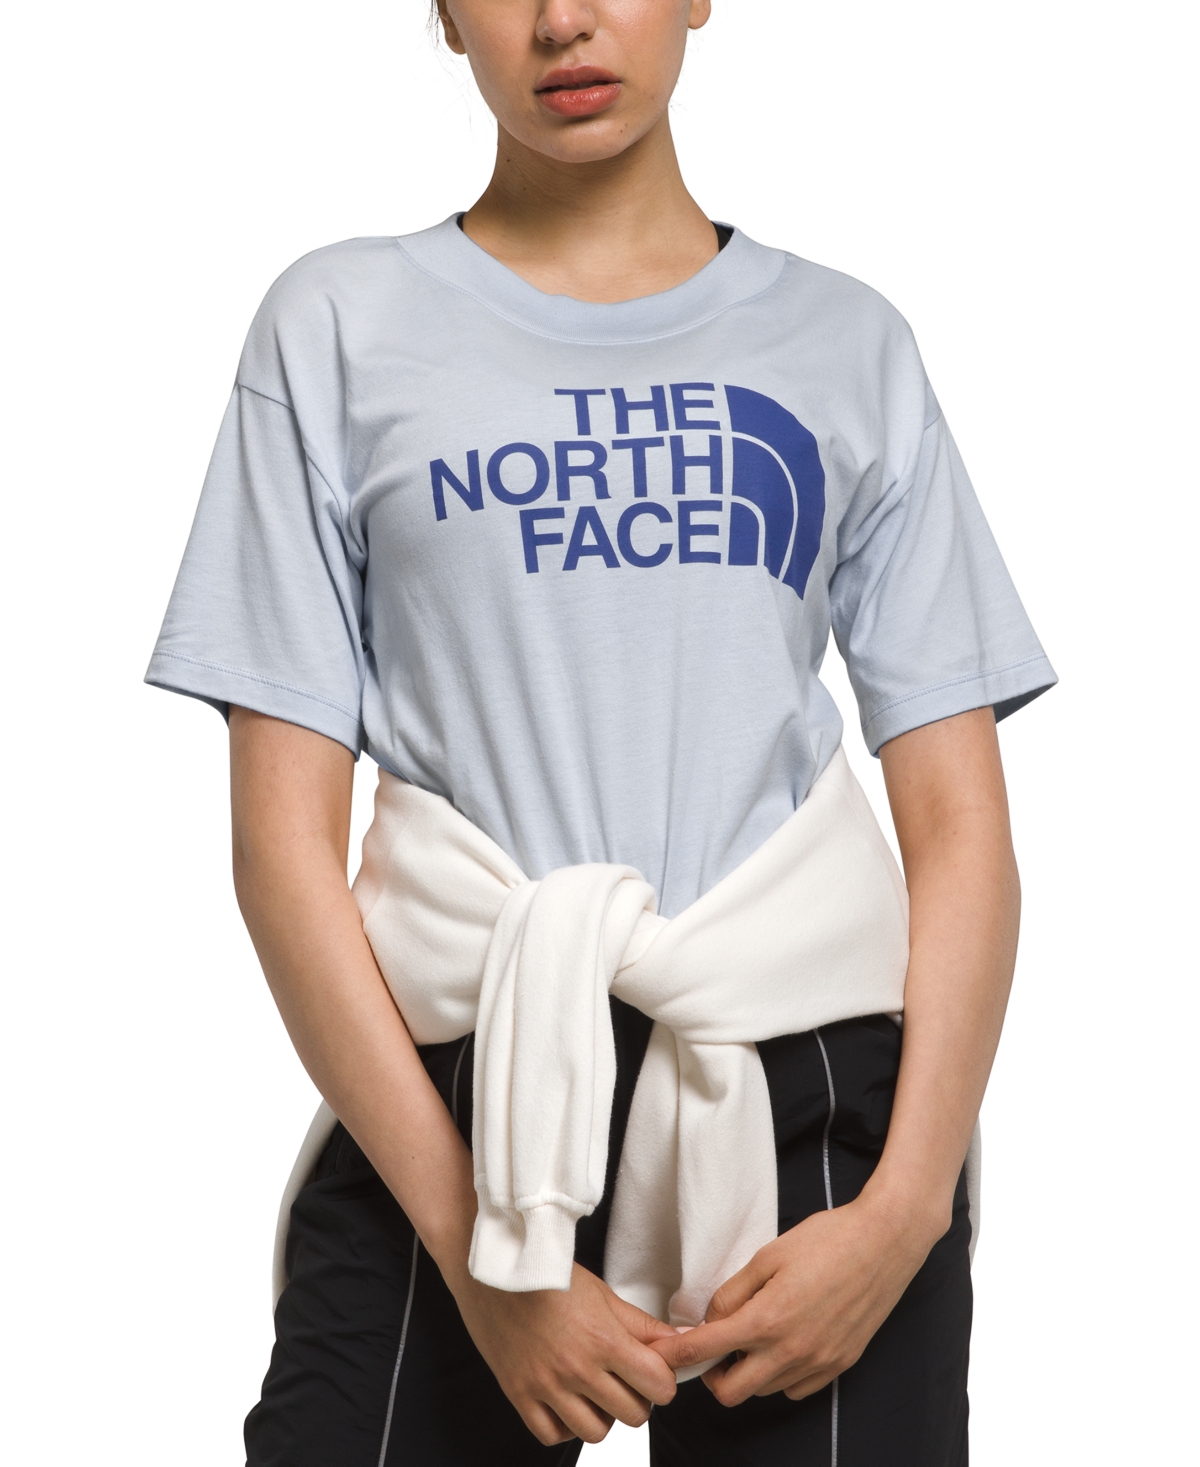 THE NORTH FACE WOMEN'S HALF DOME CROPPED T-SHIRT